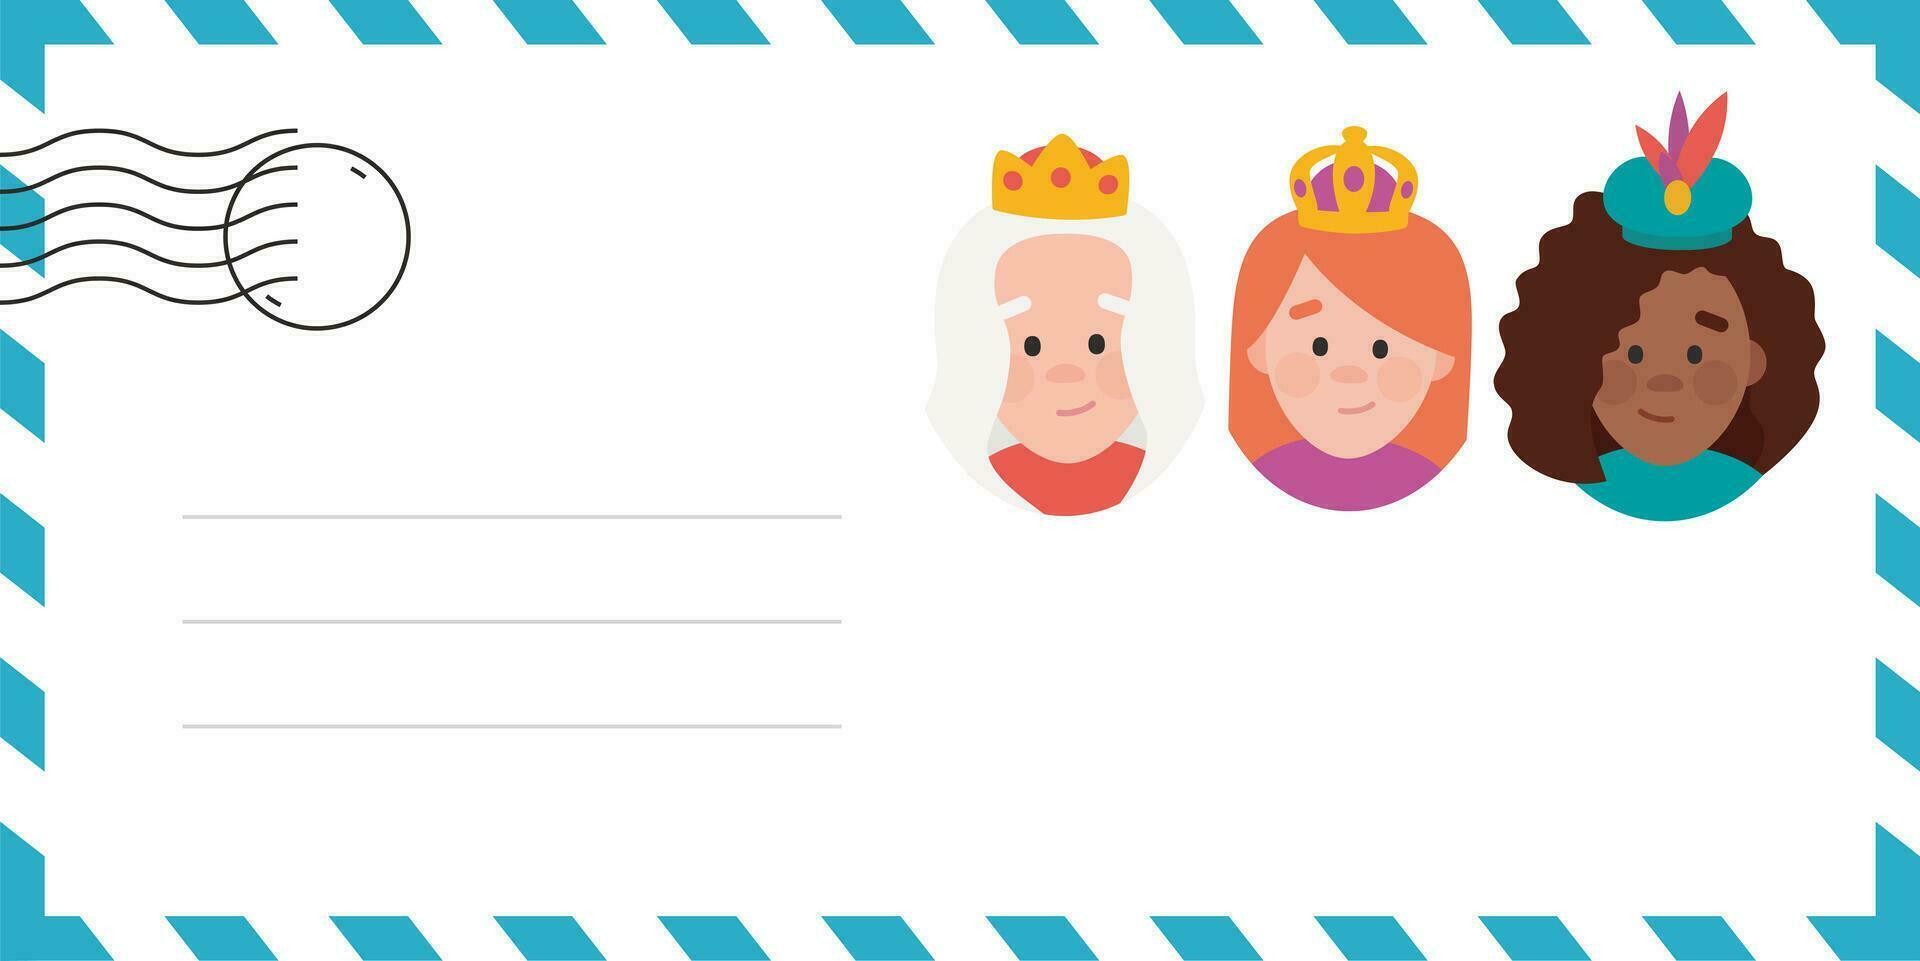 Envelope of the wise women. The three queens of orient, Melchiora, Gasparda and Balthazara. Funny vectorized letter. vector